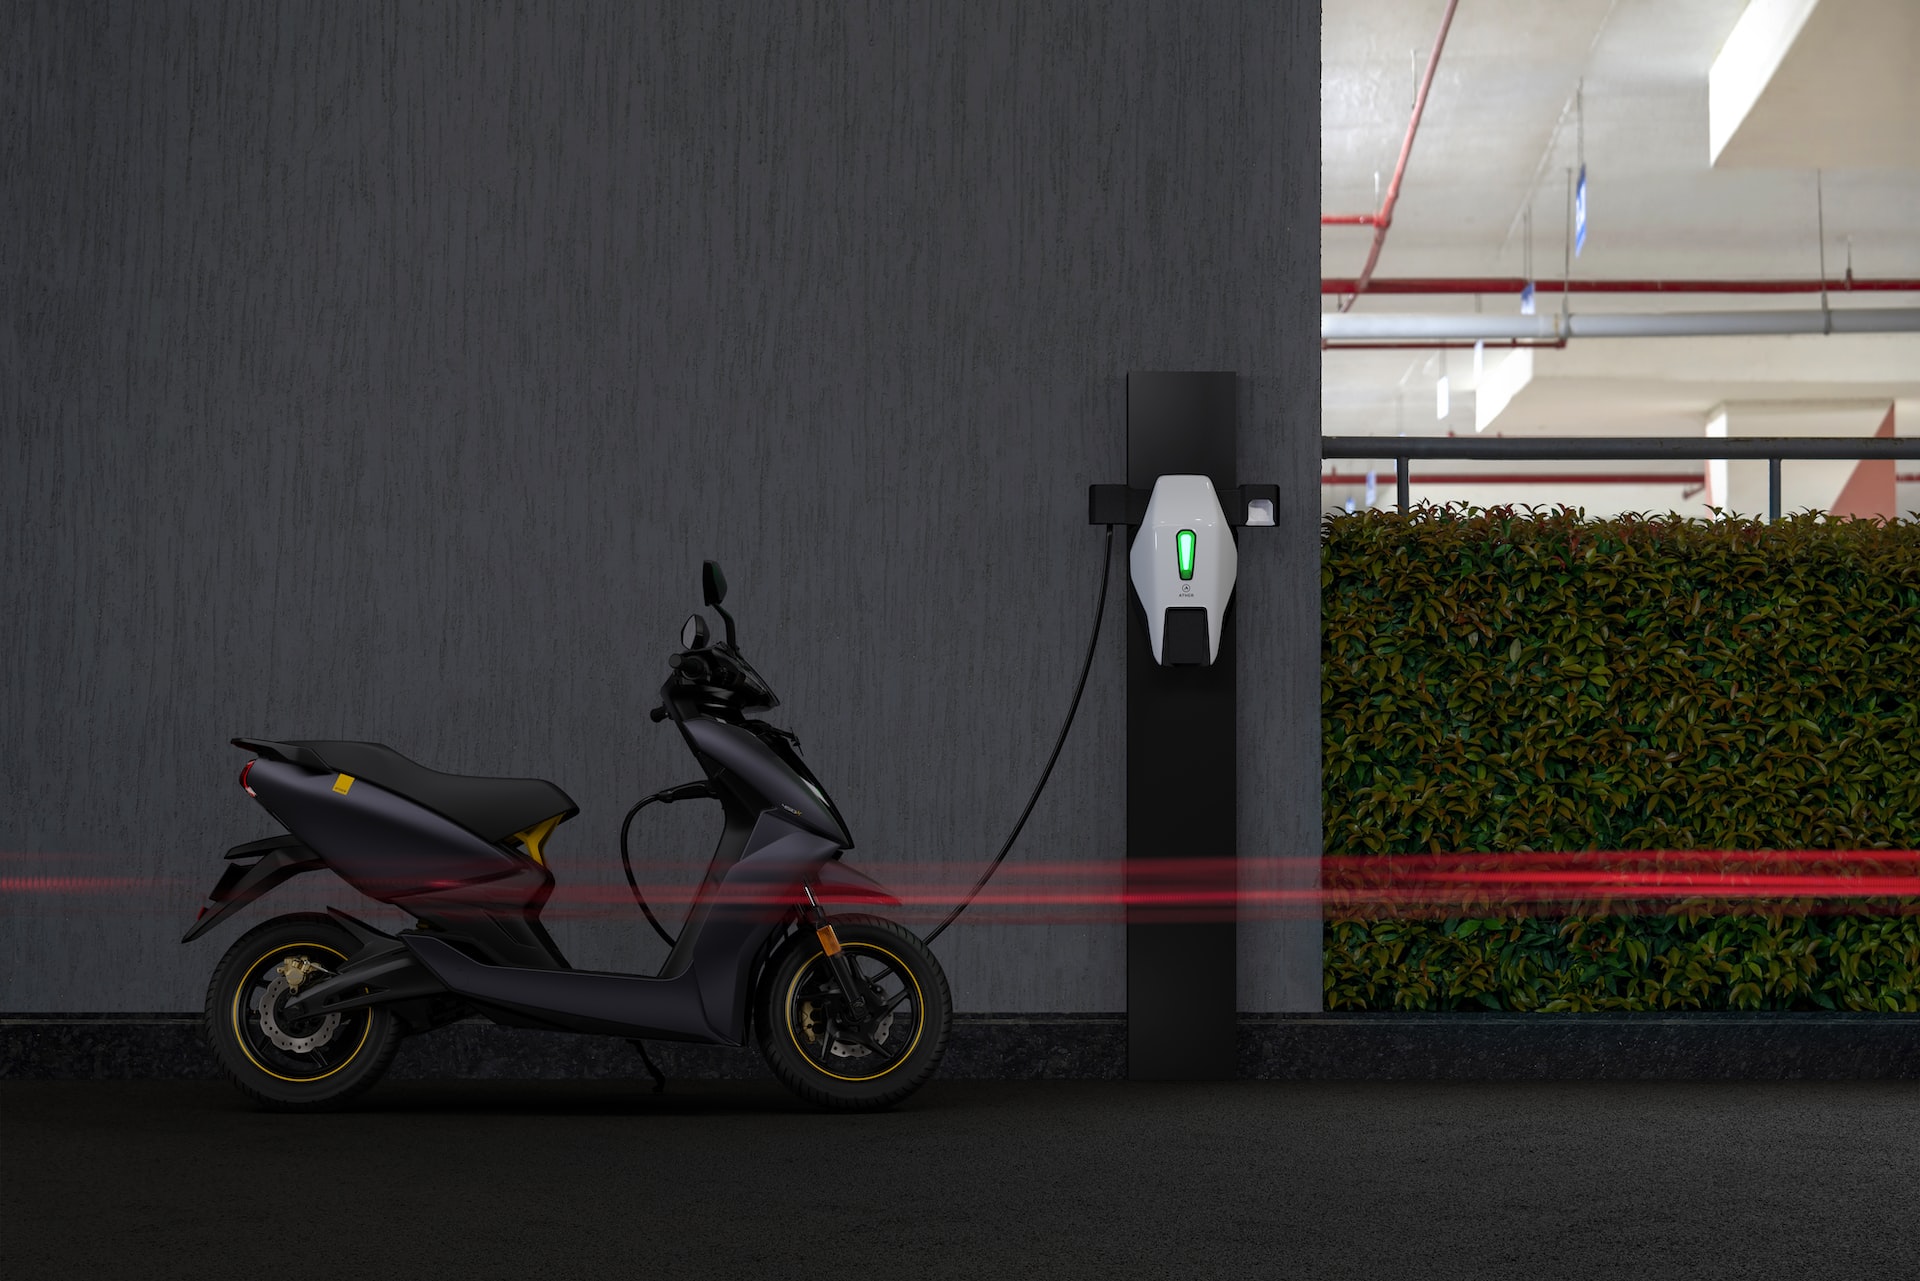 Motorcycle Charging on a Public EV Charging Station.